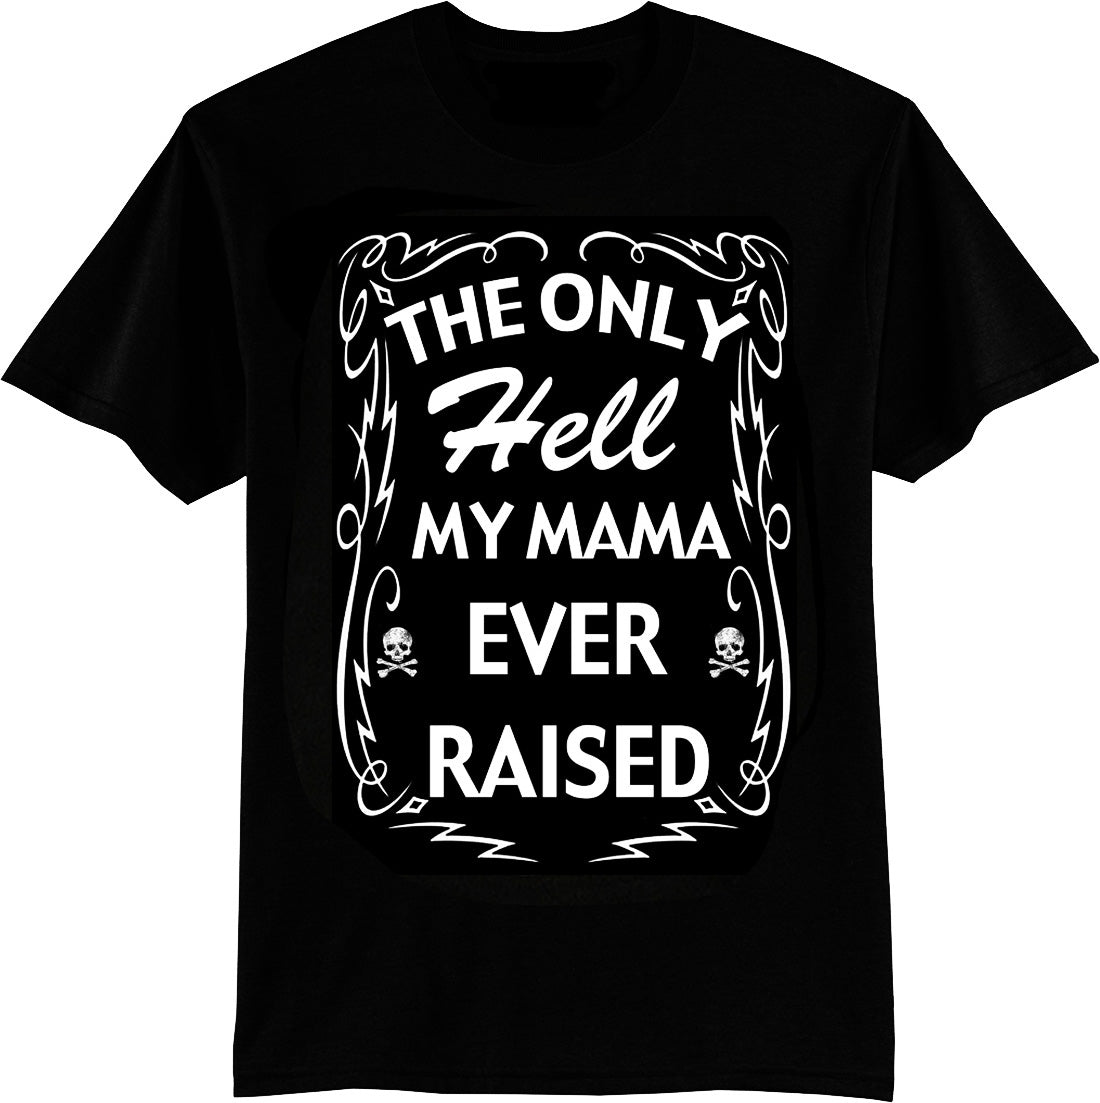 THE ONLY HELL MY MAMA EVER RAISED MEN’S T SHIRT - Trailsclothing.com